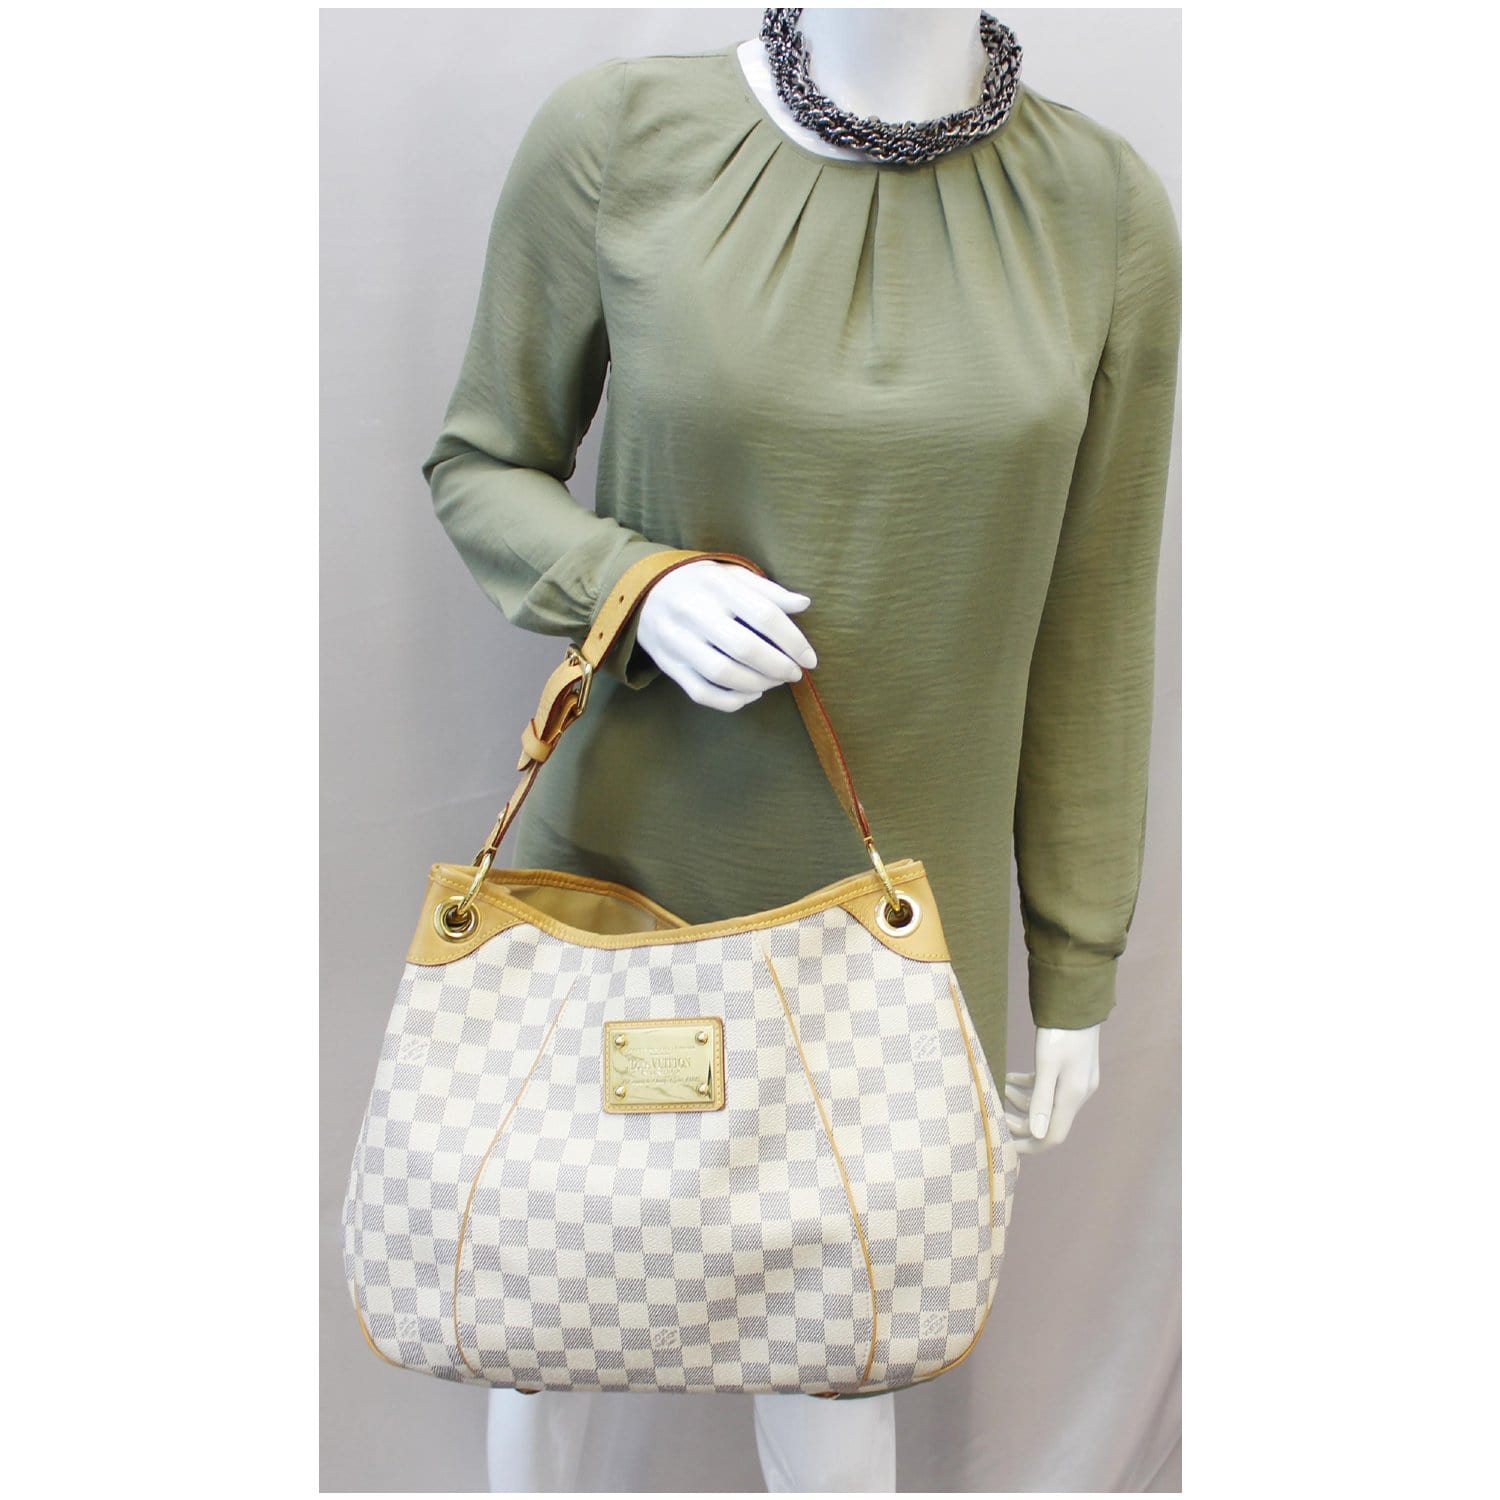 Pre Owned Authentic Louis Vuitton White Damier Azur Canvas Galliera PM  Shoulder Bag - Mrs Vintage - Selling Vintage Wedding Lace Dress / Gowns &  Accessories from 1920s – 1990s. And many